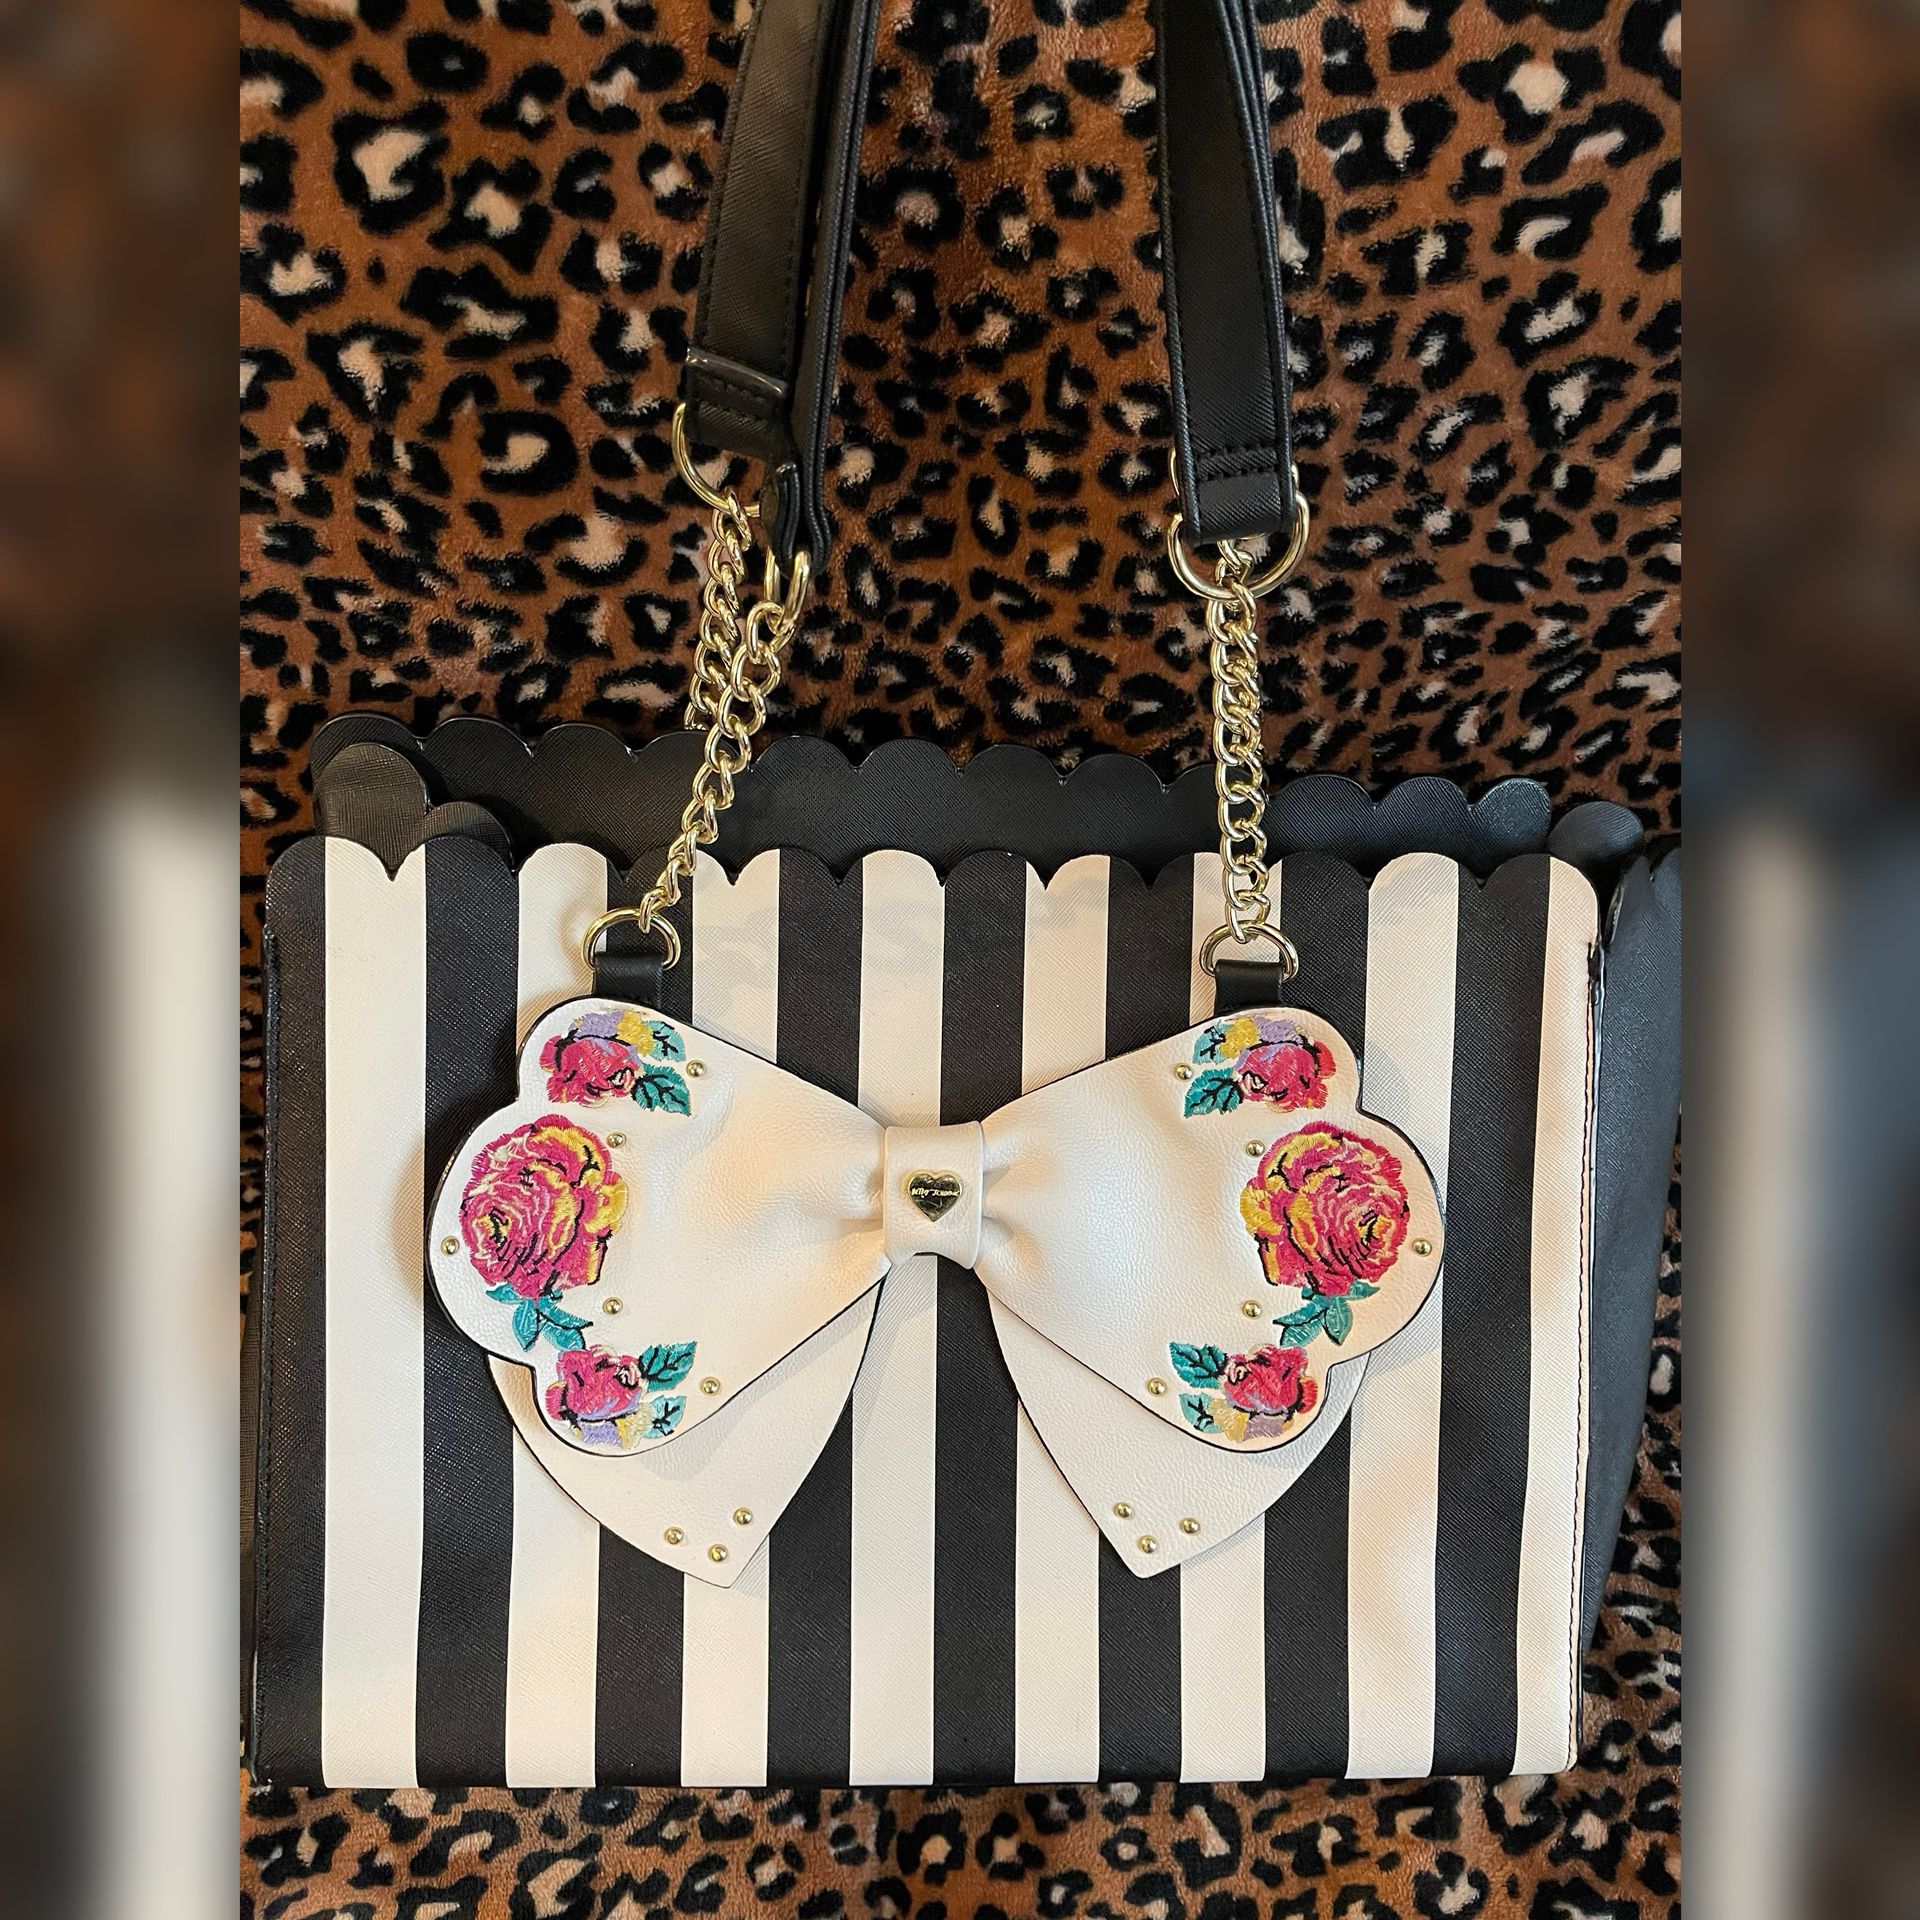 Large Black & White Striped with Bow Betsey Johnson Tote - Like New